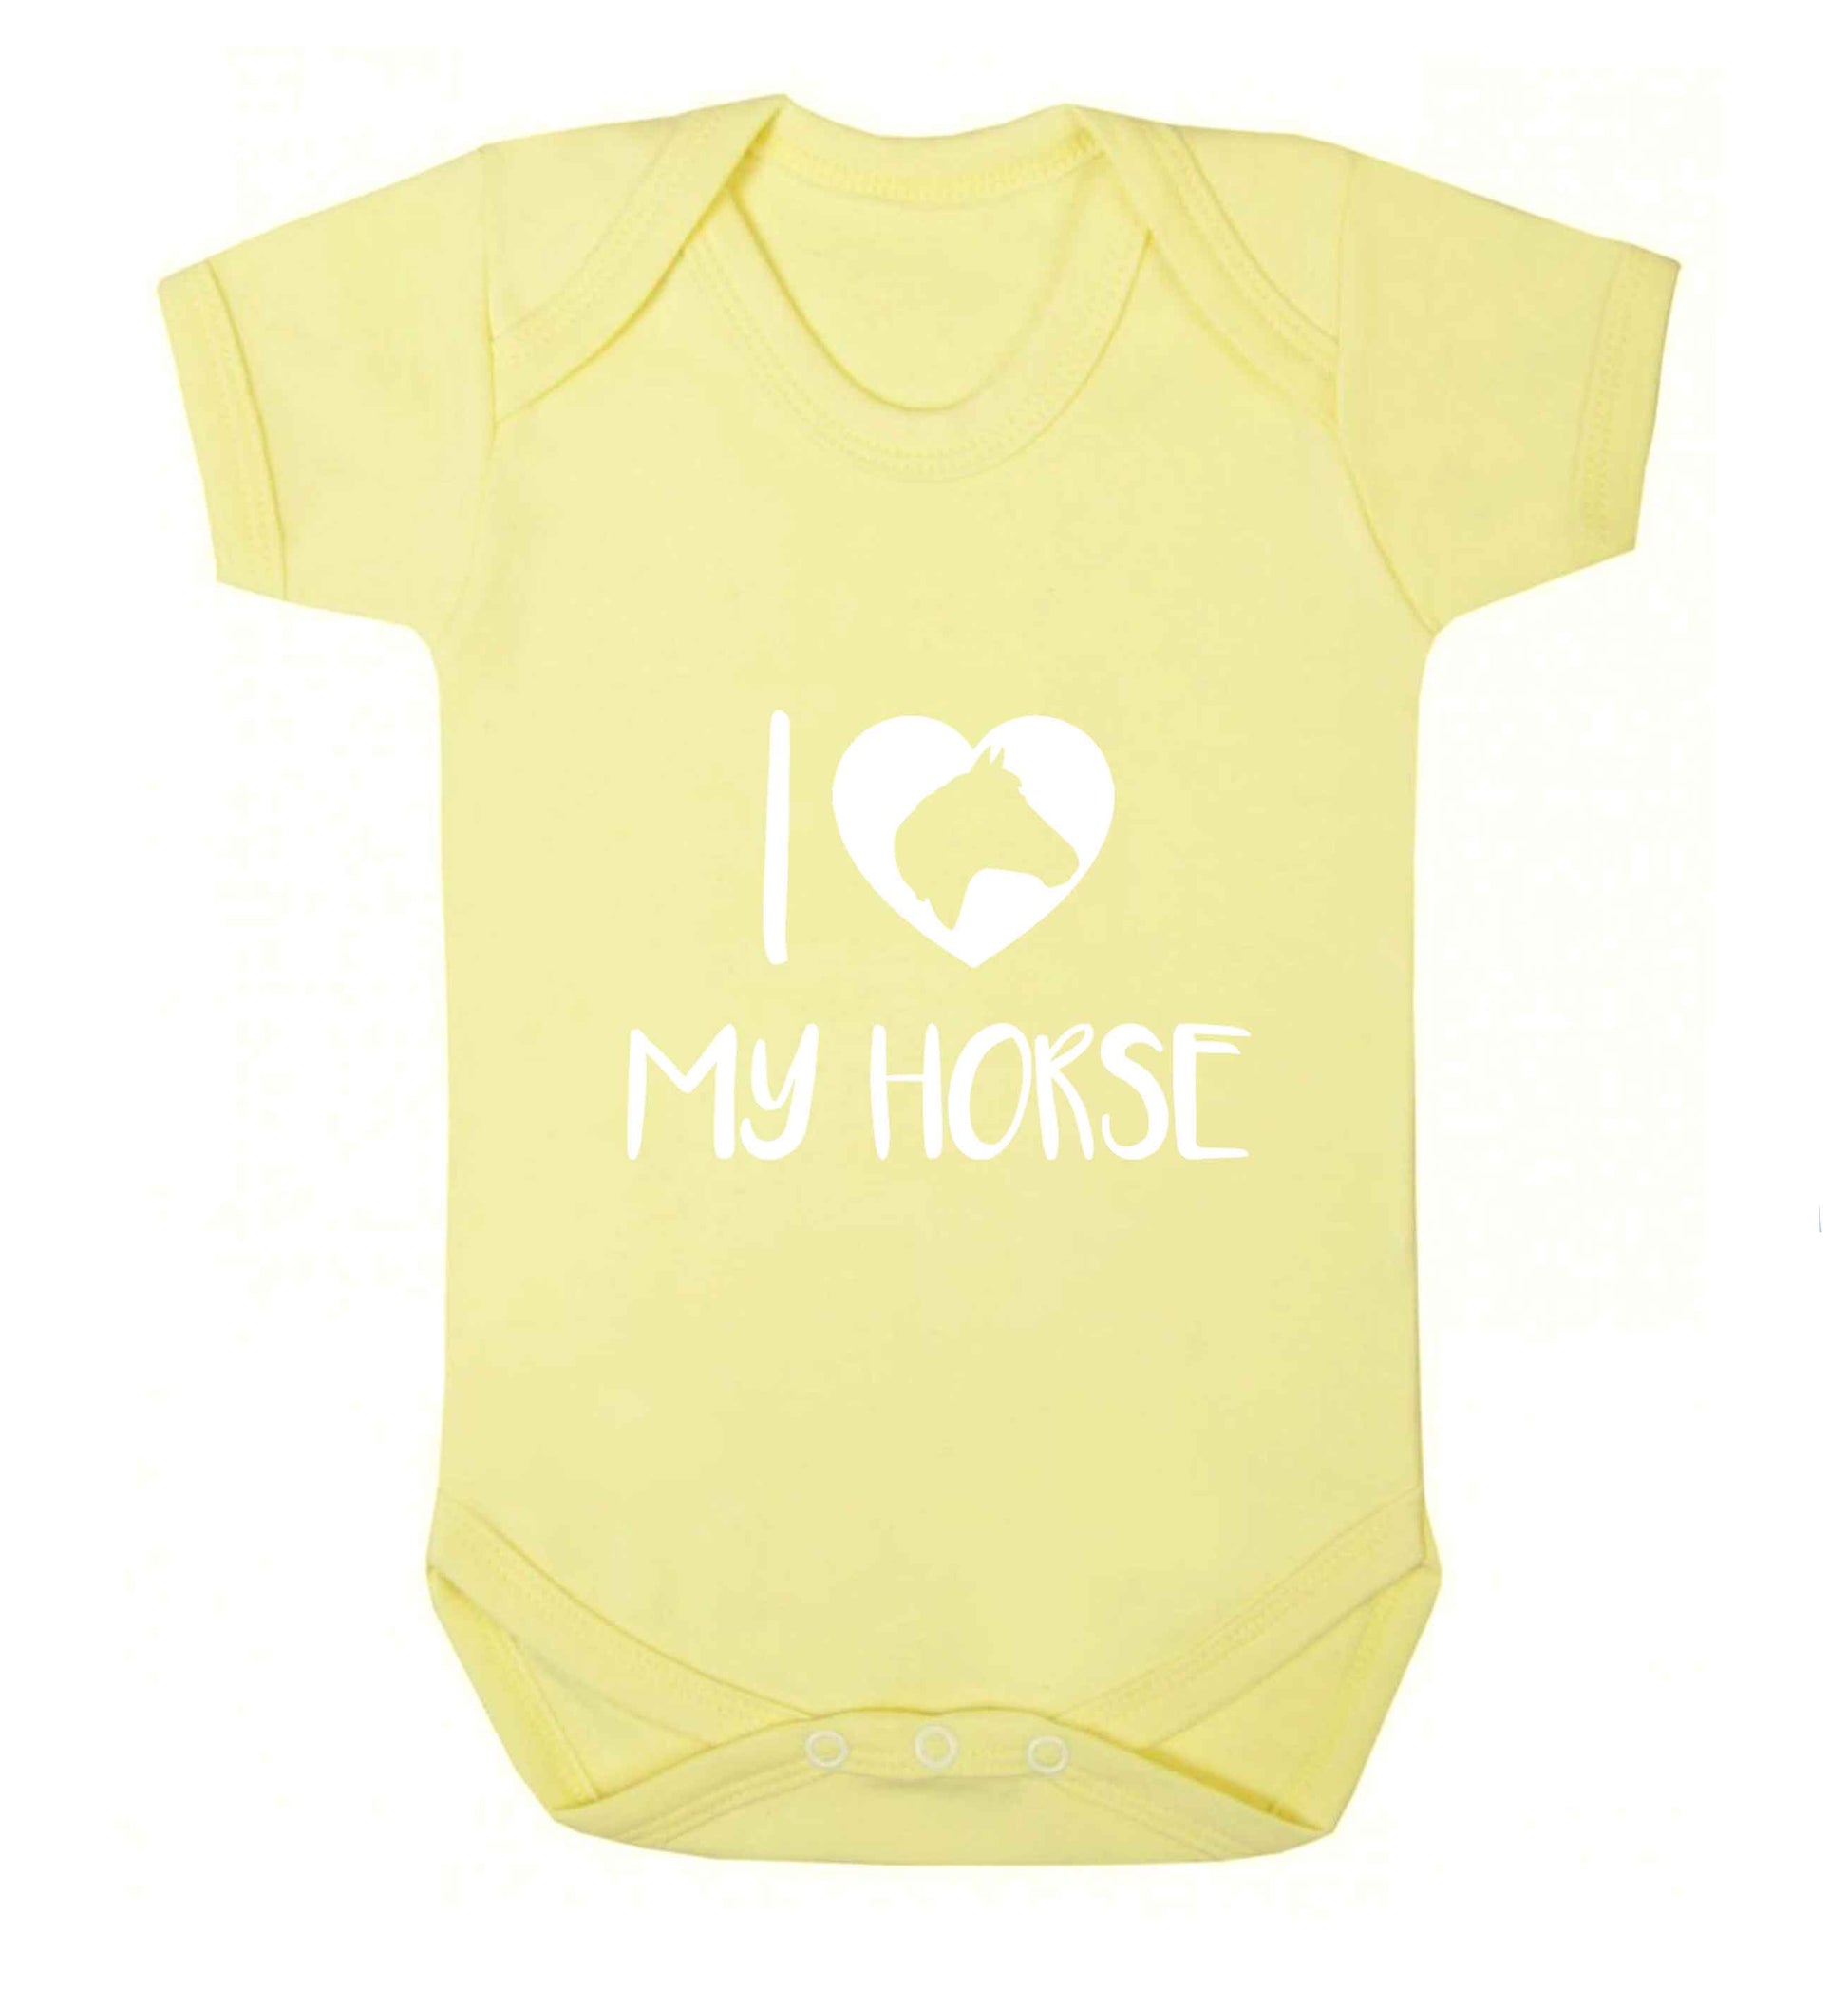 I love my horse baby vest pale yellow 18-24 months